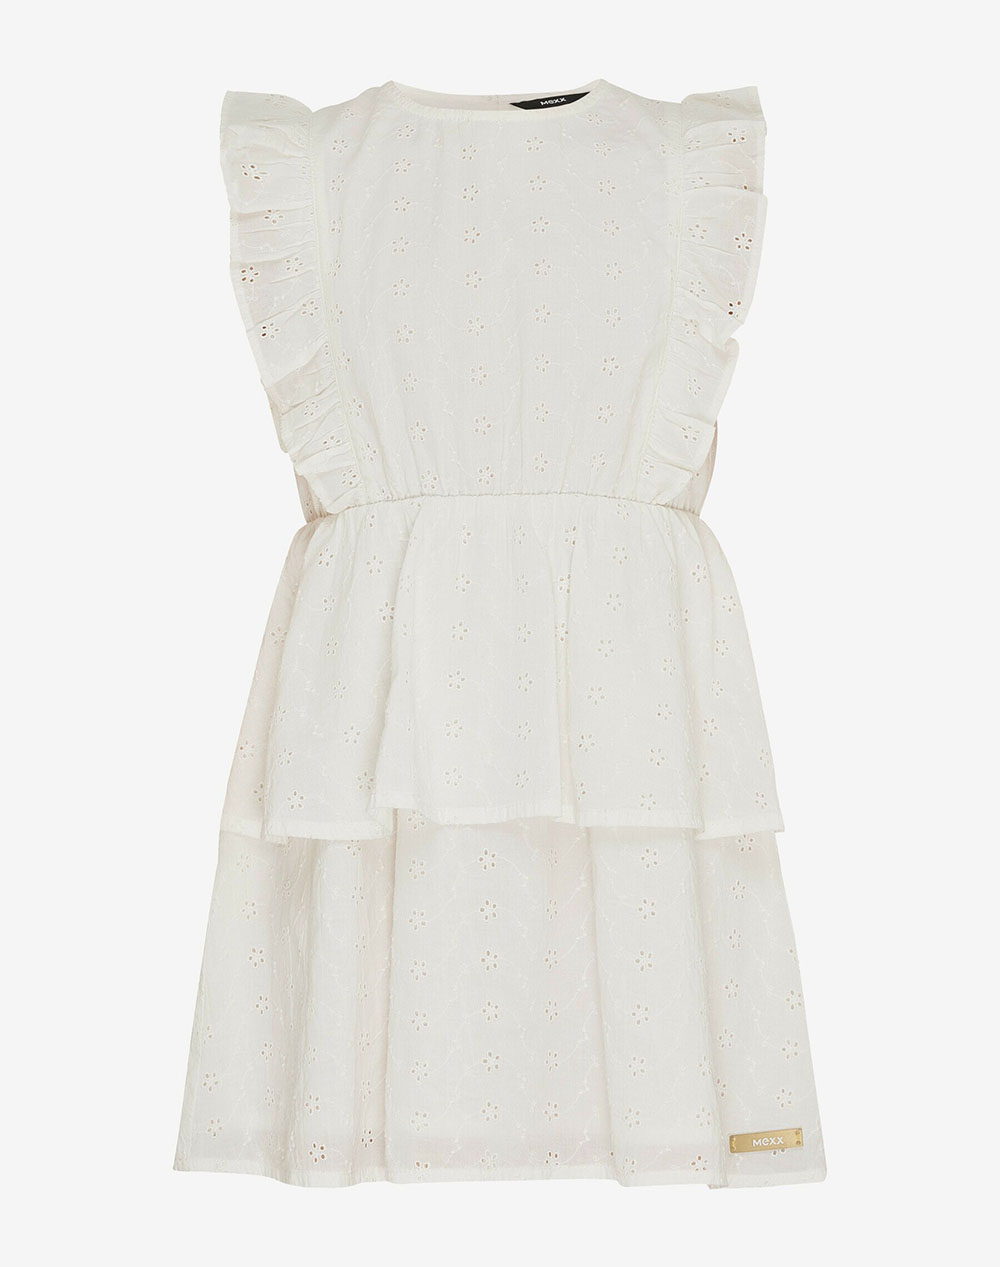 MEXX Broderie dress with ruffles